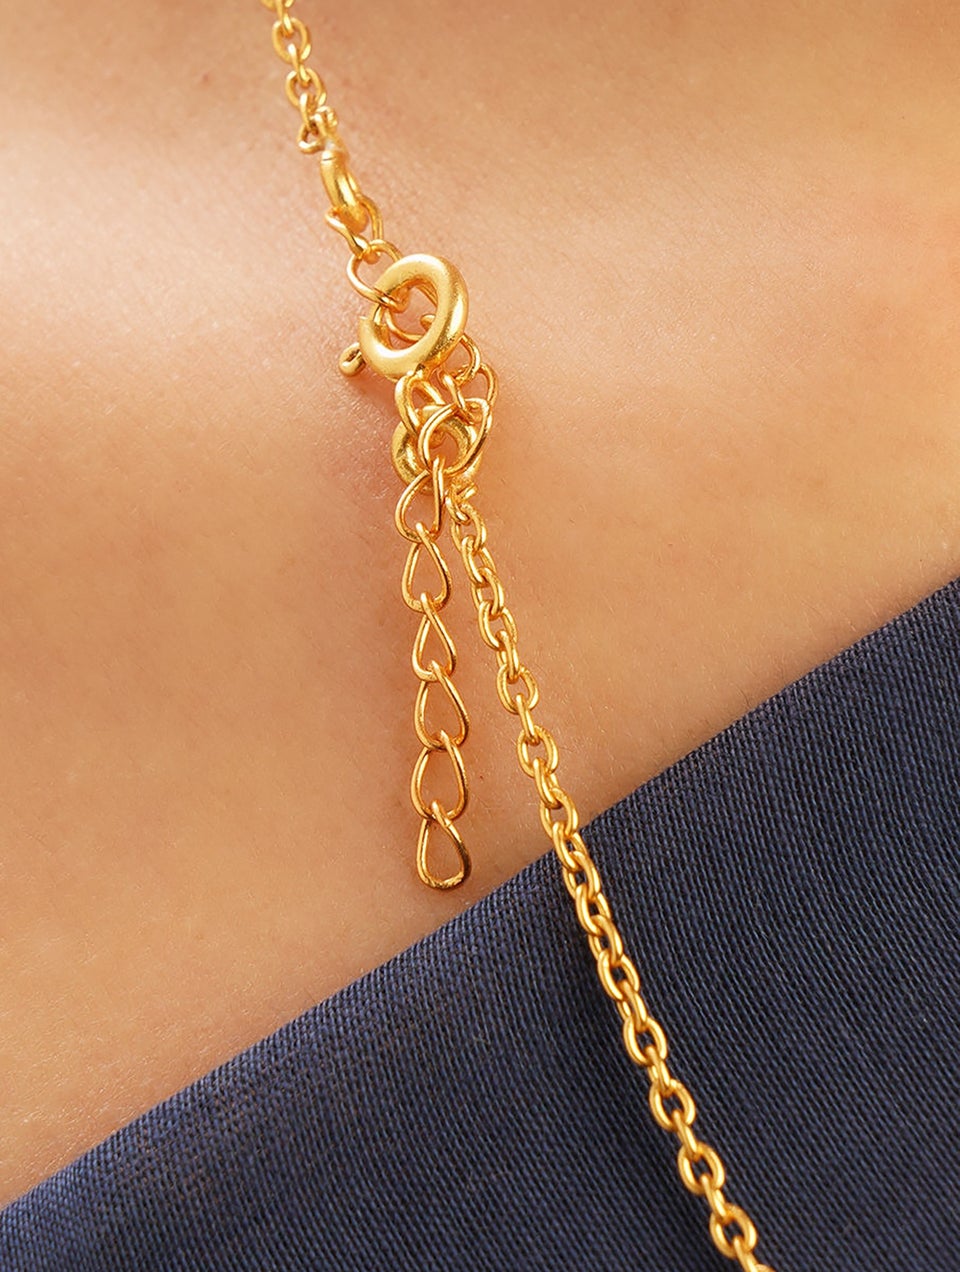 Women Gold Necklace